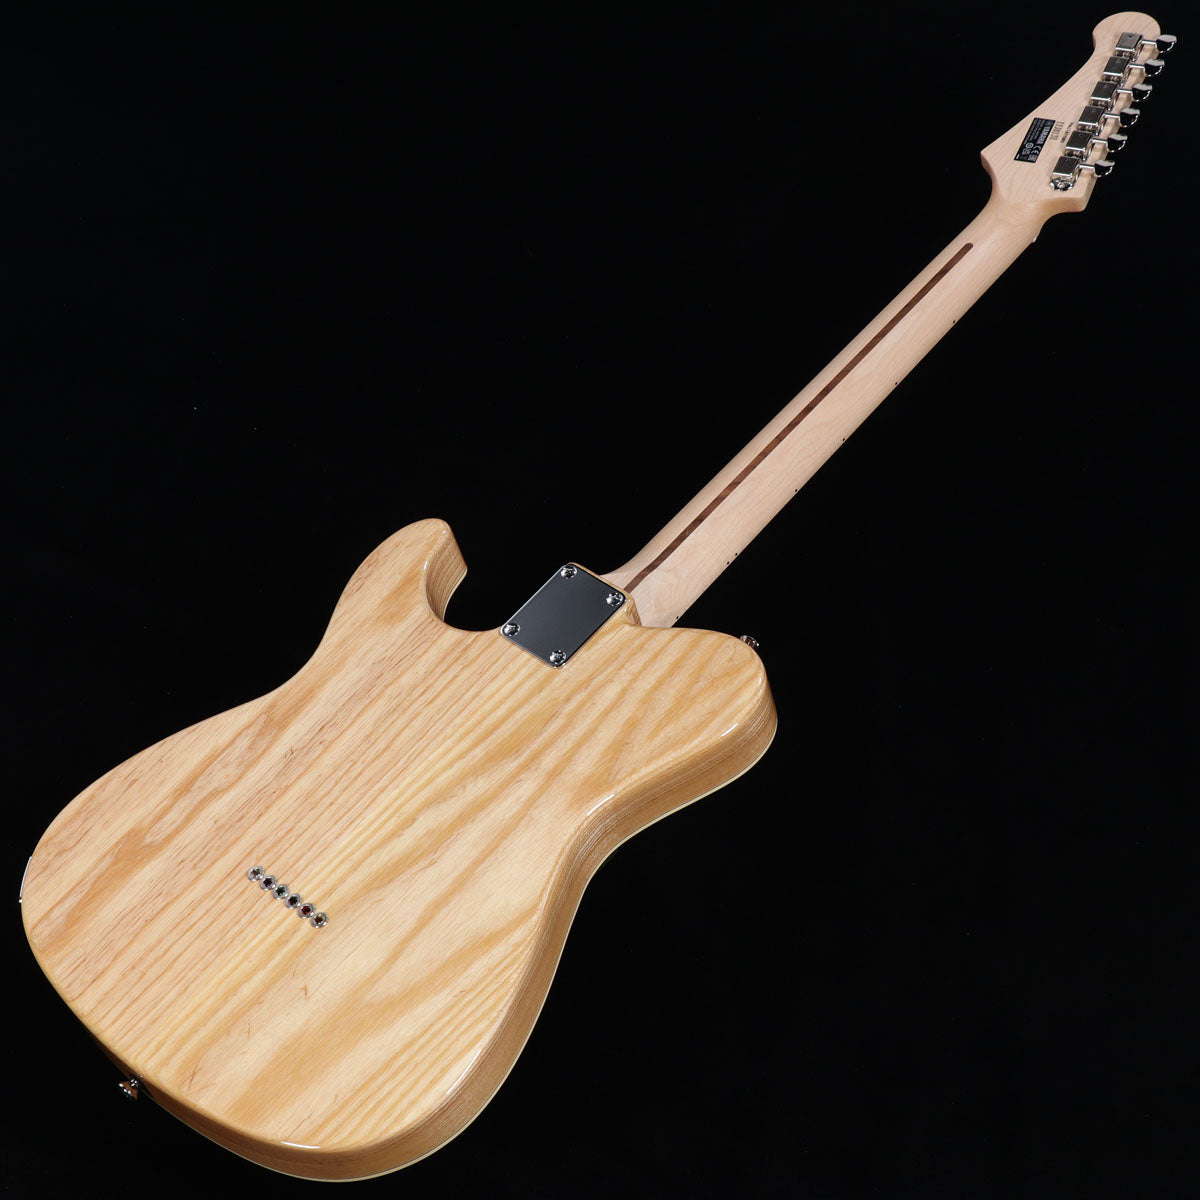 [SN IJJ013E] YAMAHA / Pacifica 1611MS Mike Stern Signature Model [3.62kg] [05]